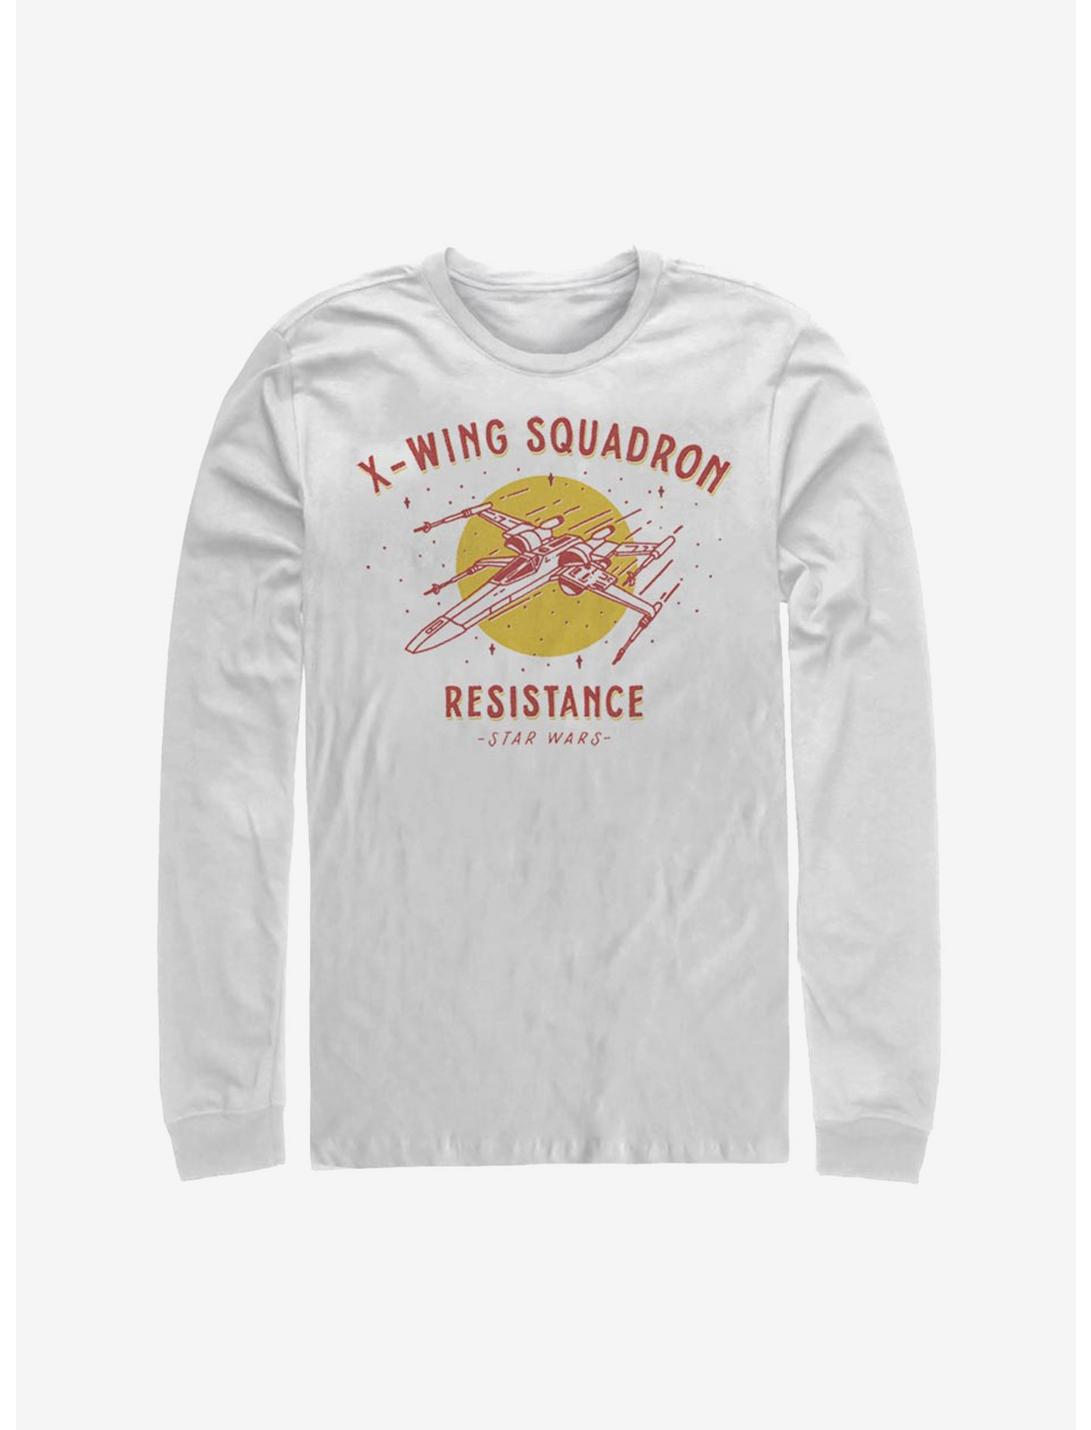 Star Wars Episode IX The Rise Of Skywalker X-Wing Squadron Resistance Long-Sleeve T-Shirt, WHITE, hi-res